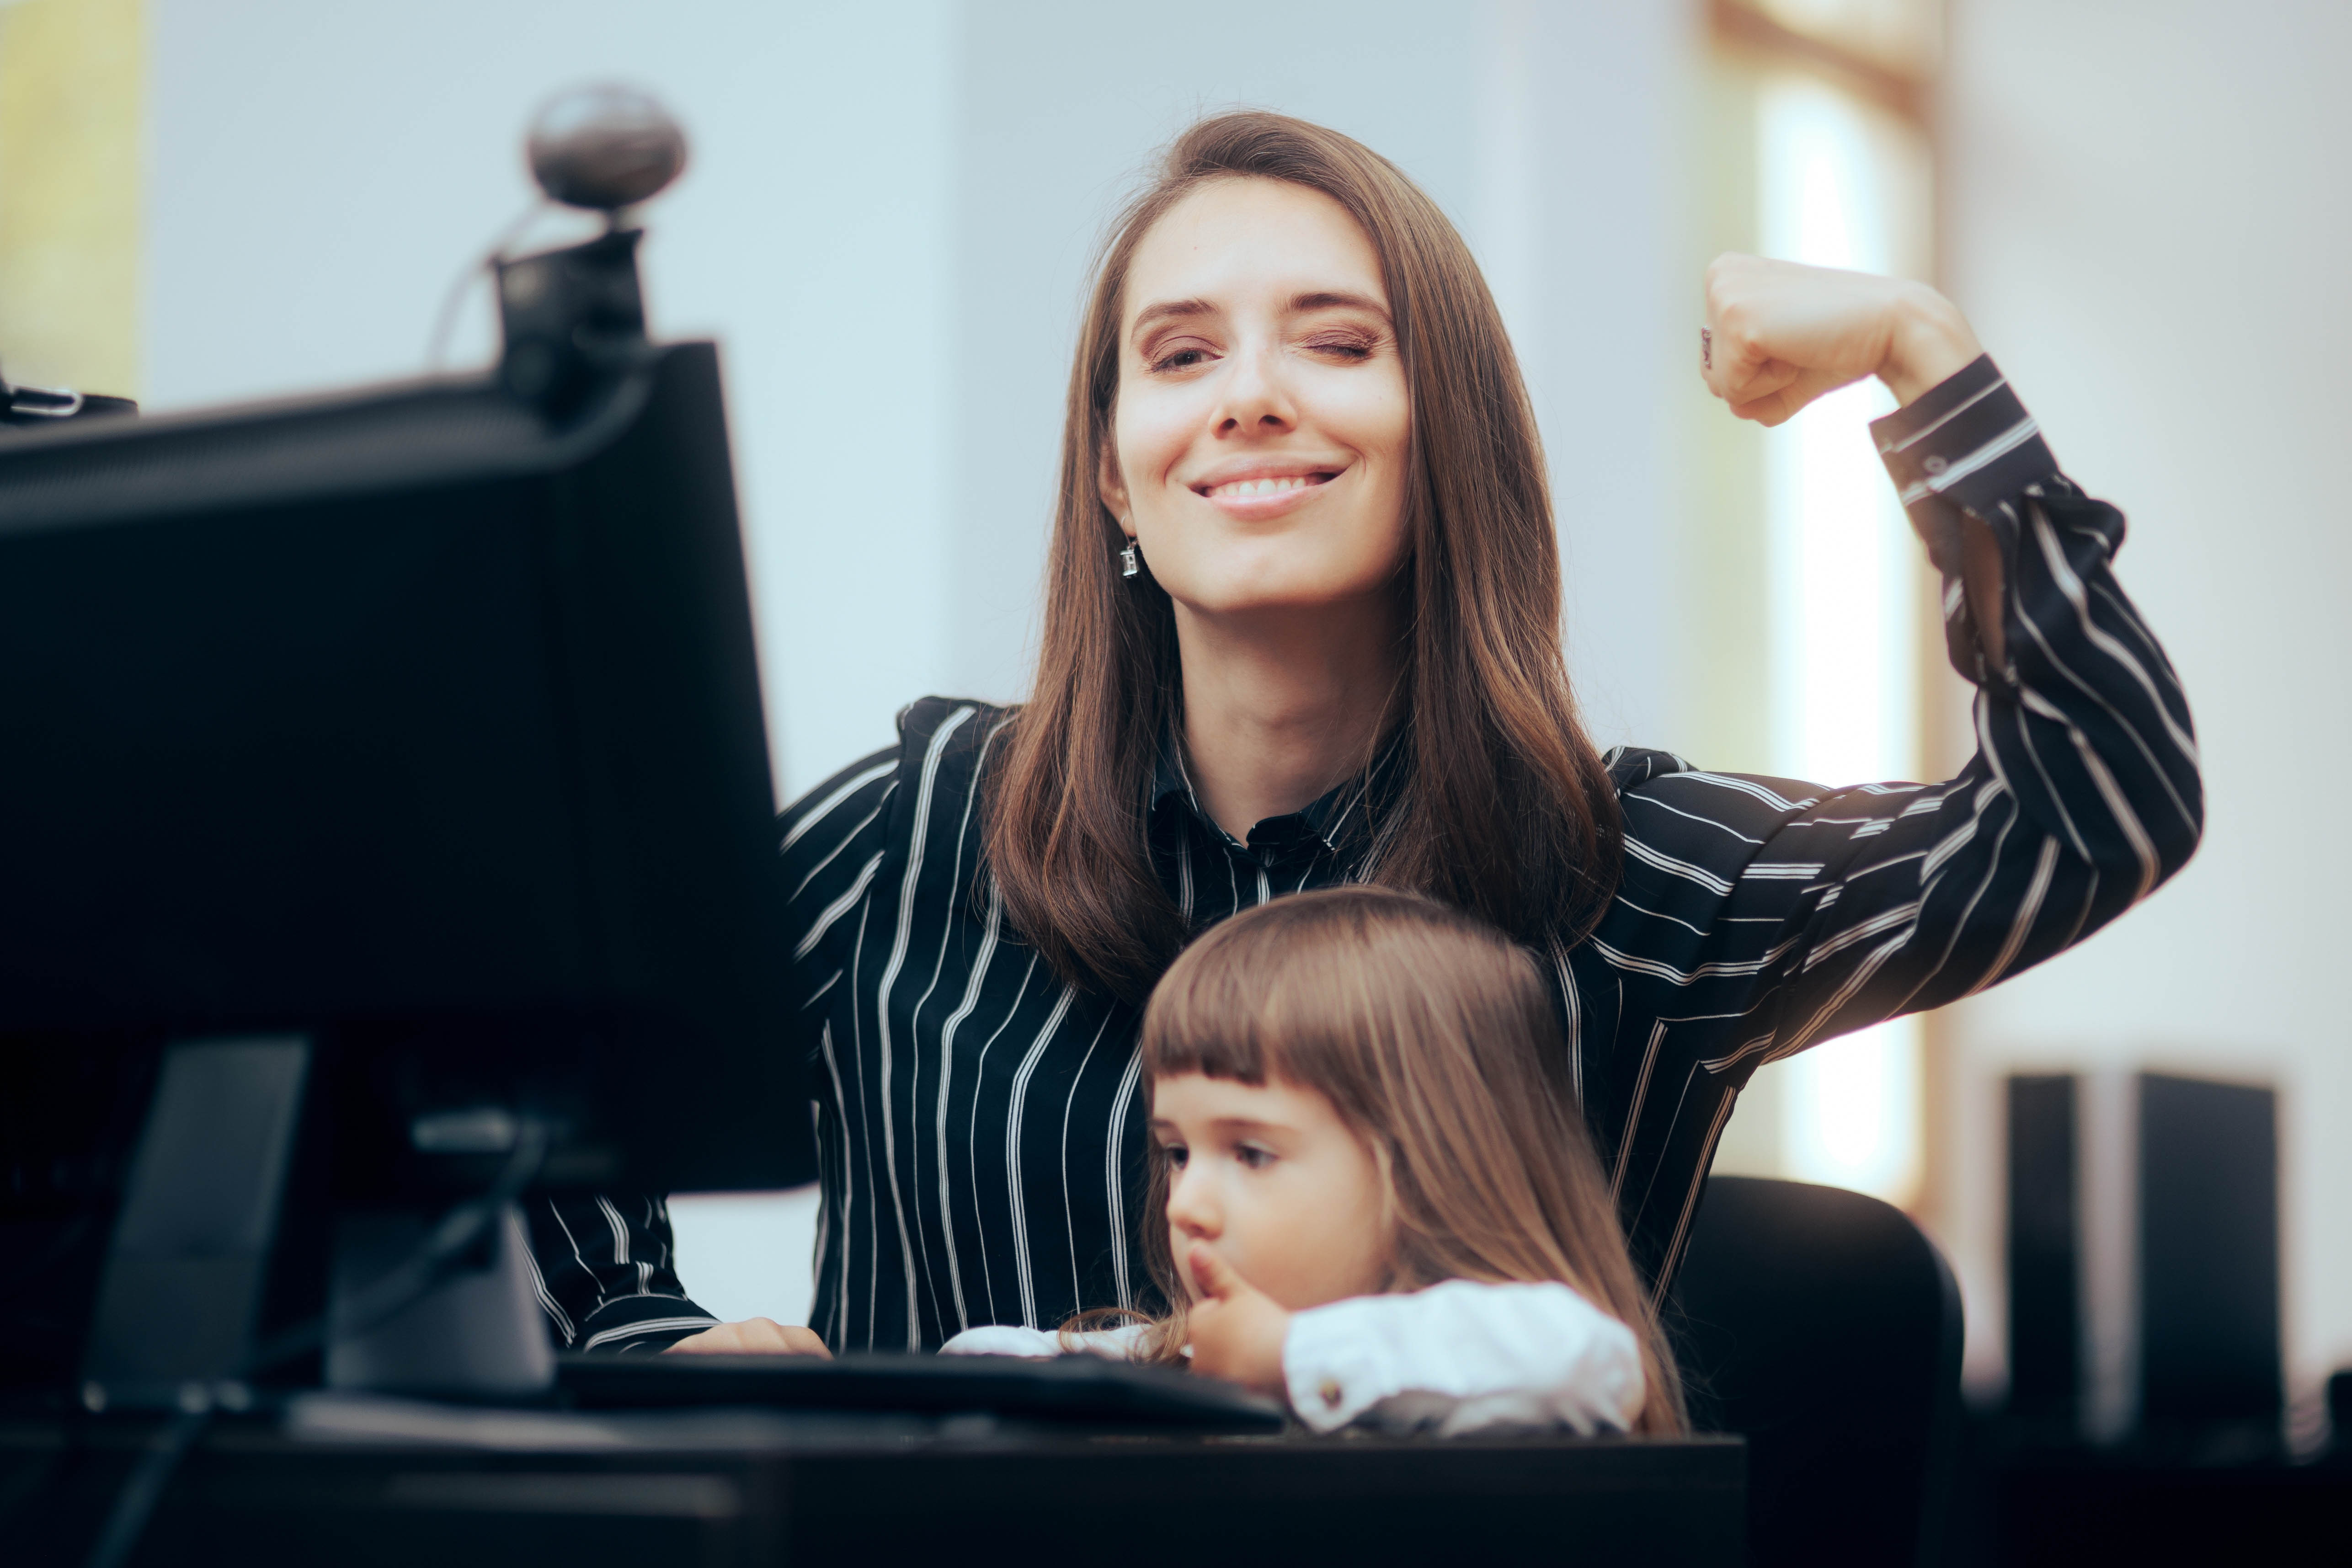 Professional looking young woman poses looking at the camera with her arm flexed, while a female toddler sits on her lap playing with the computer